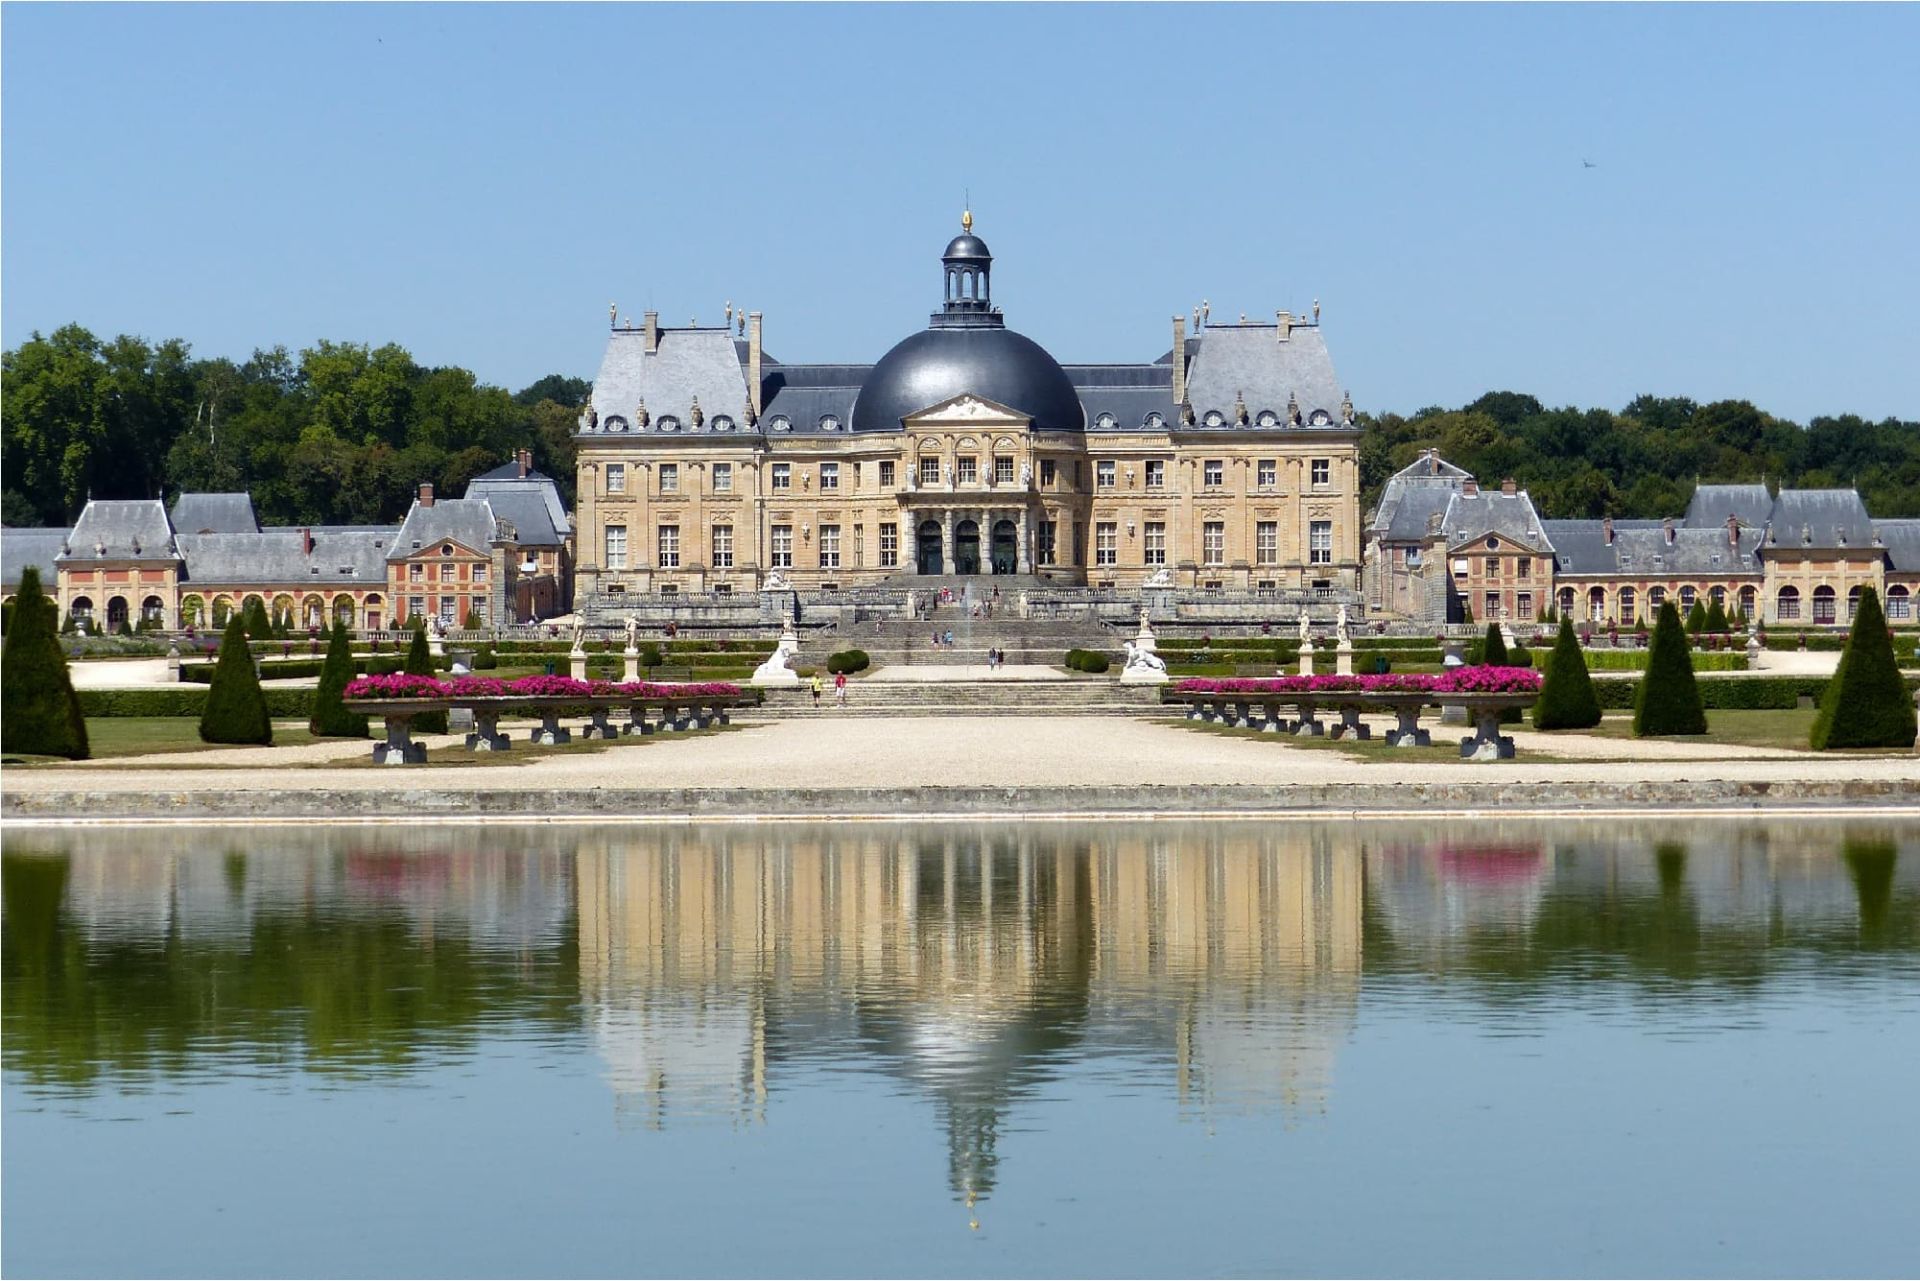 Our hotel in Villabé is located near Vaux-le-Vicomte